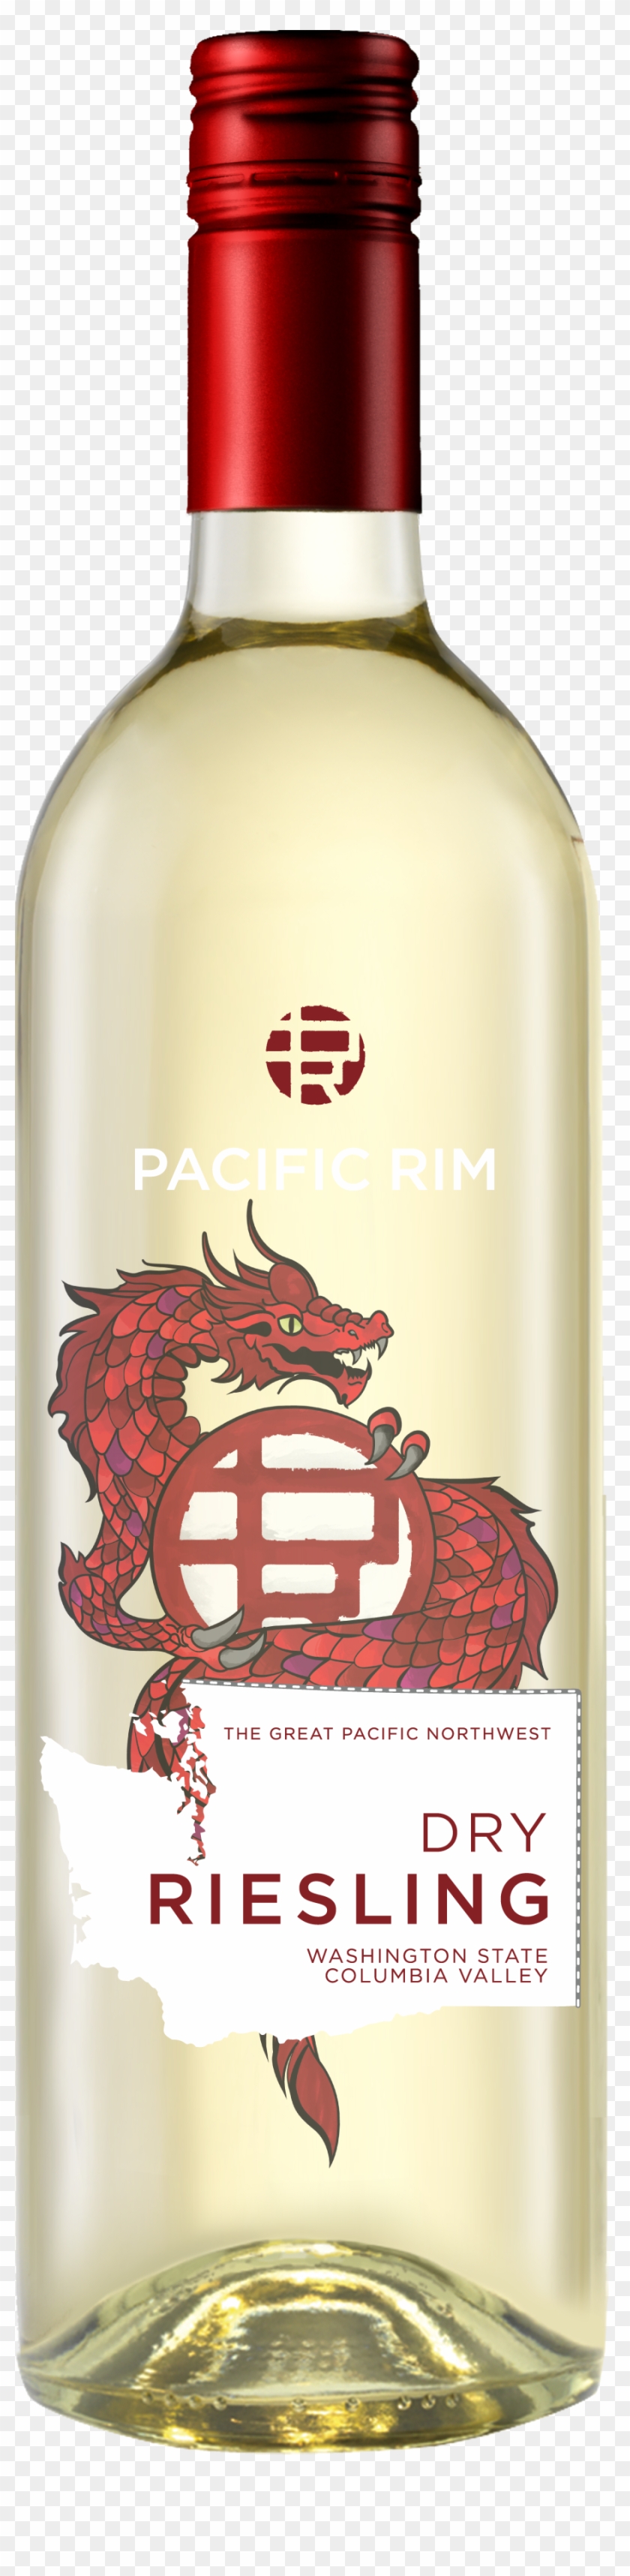 Pacific Rim Riesling Clipart #4368347